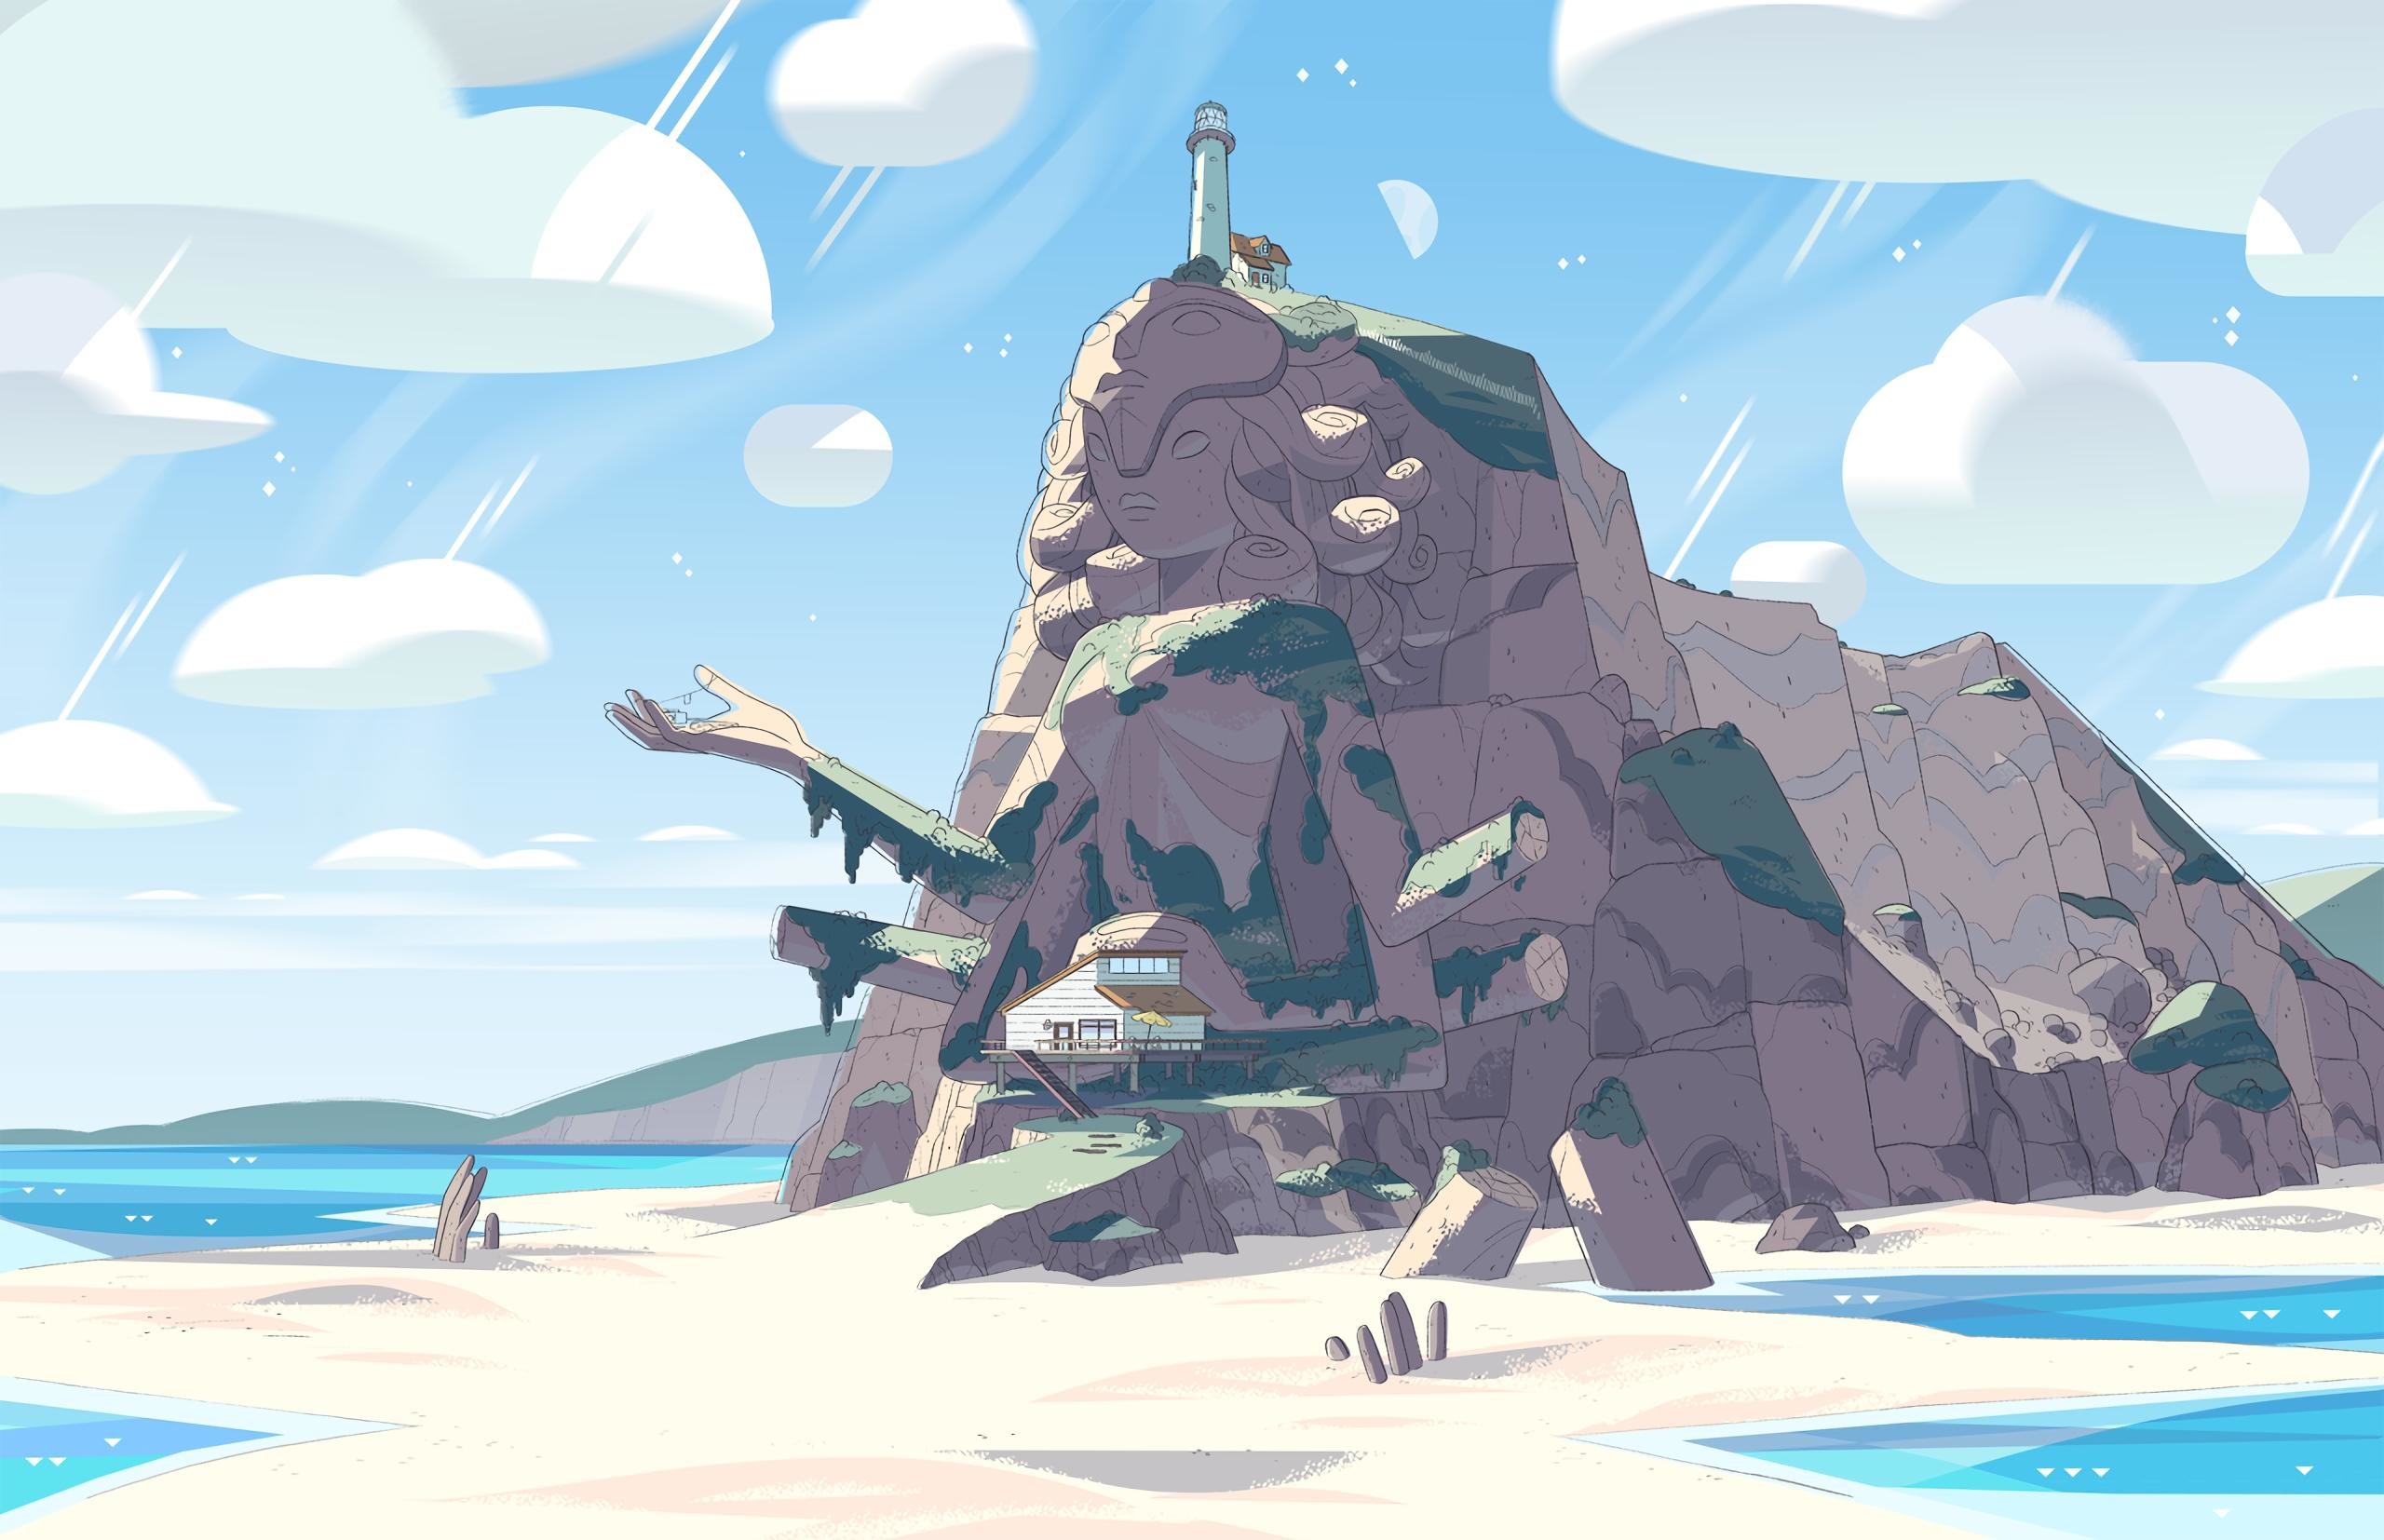 2560x1654 ... Steven Universe official art) Arin Hanson (Source: This YouTube video)